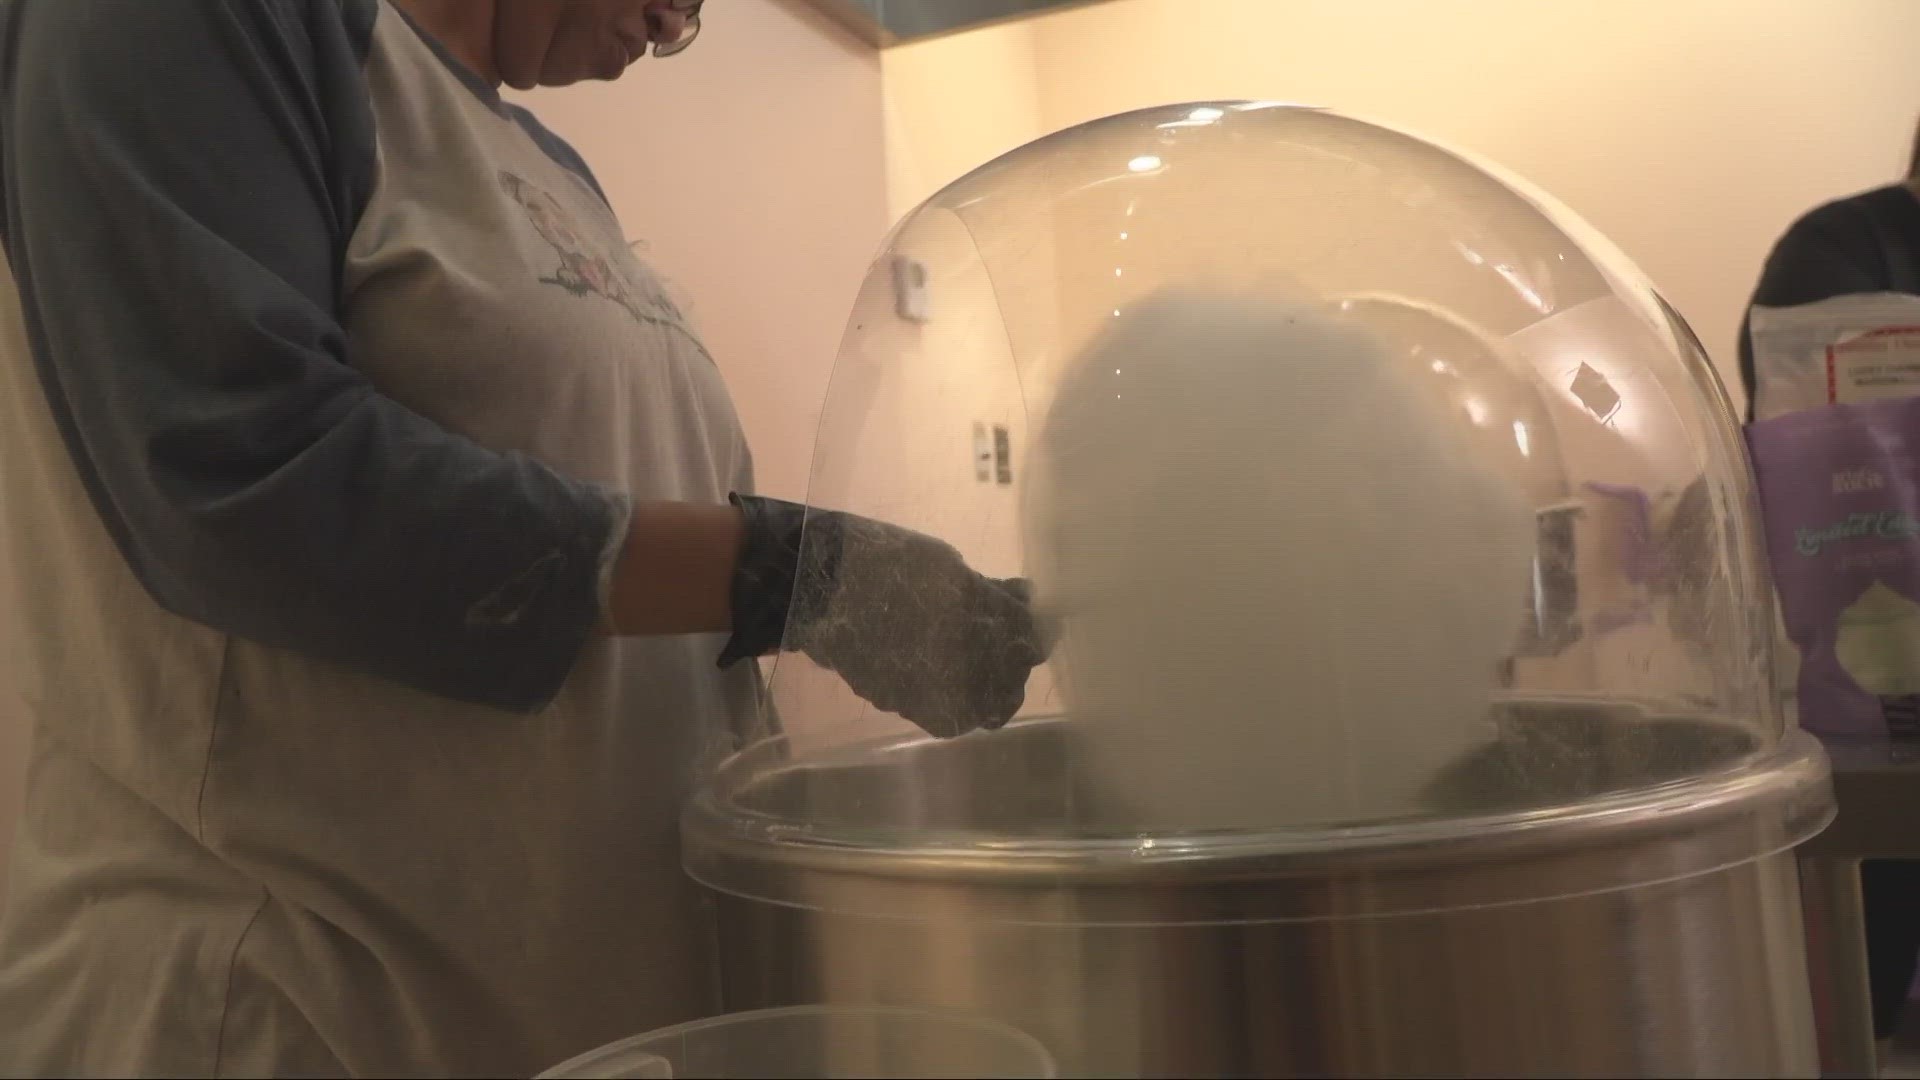 The Fairlawn-headquartered business offers flavored cotton candy and edible glitter 
bombs.